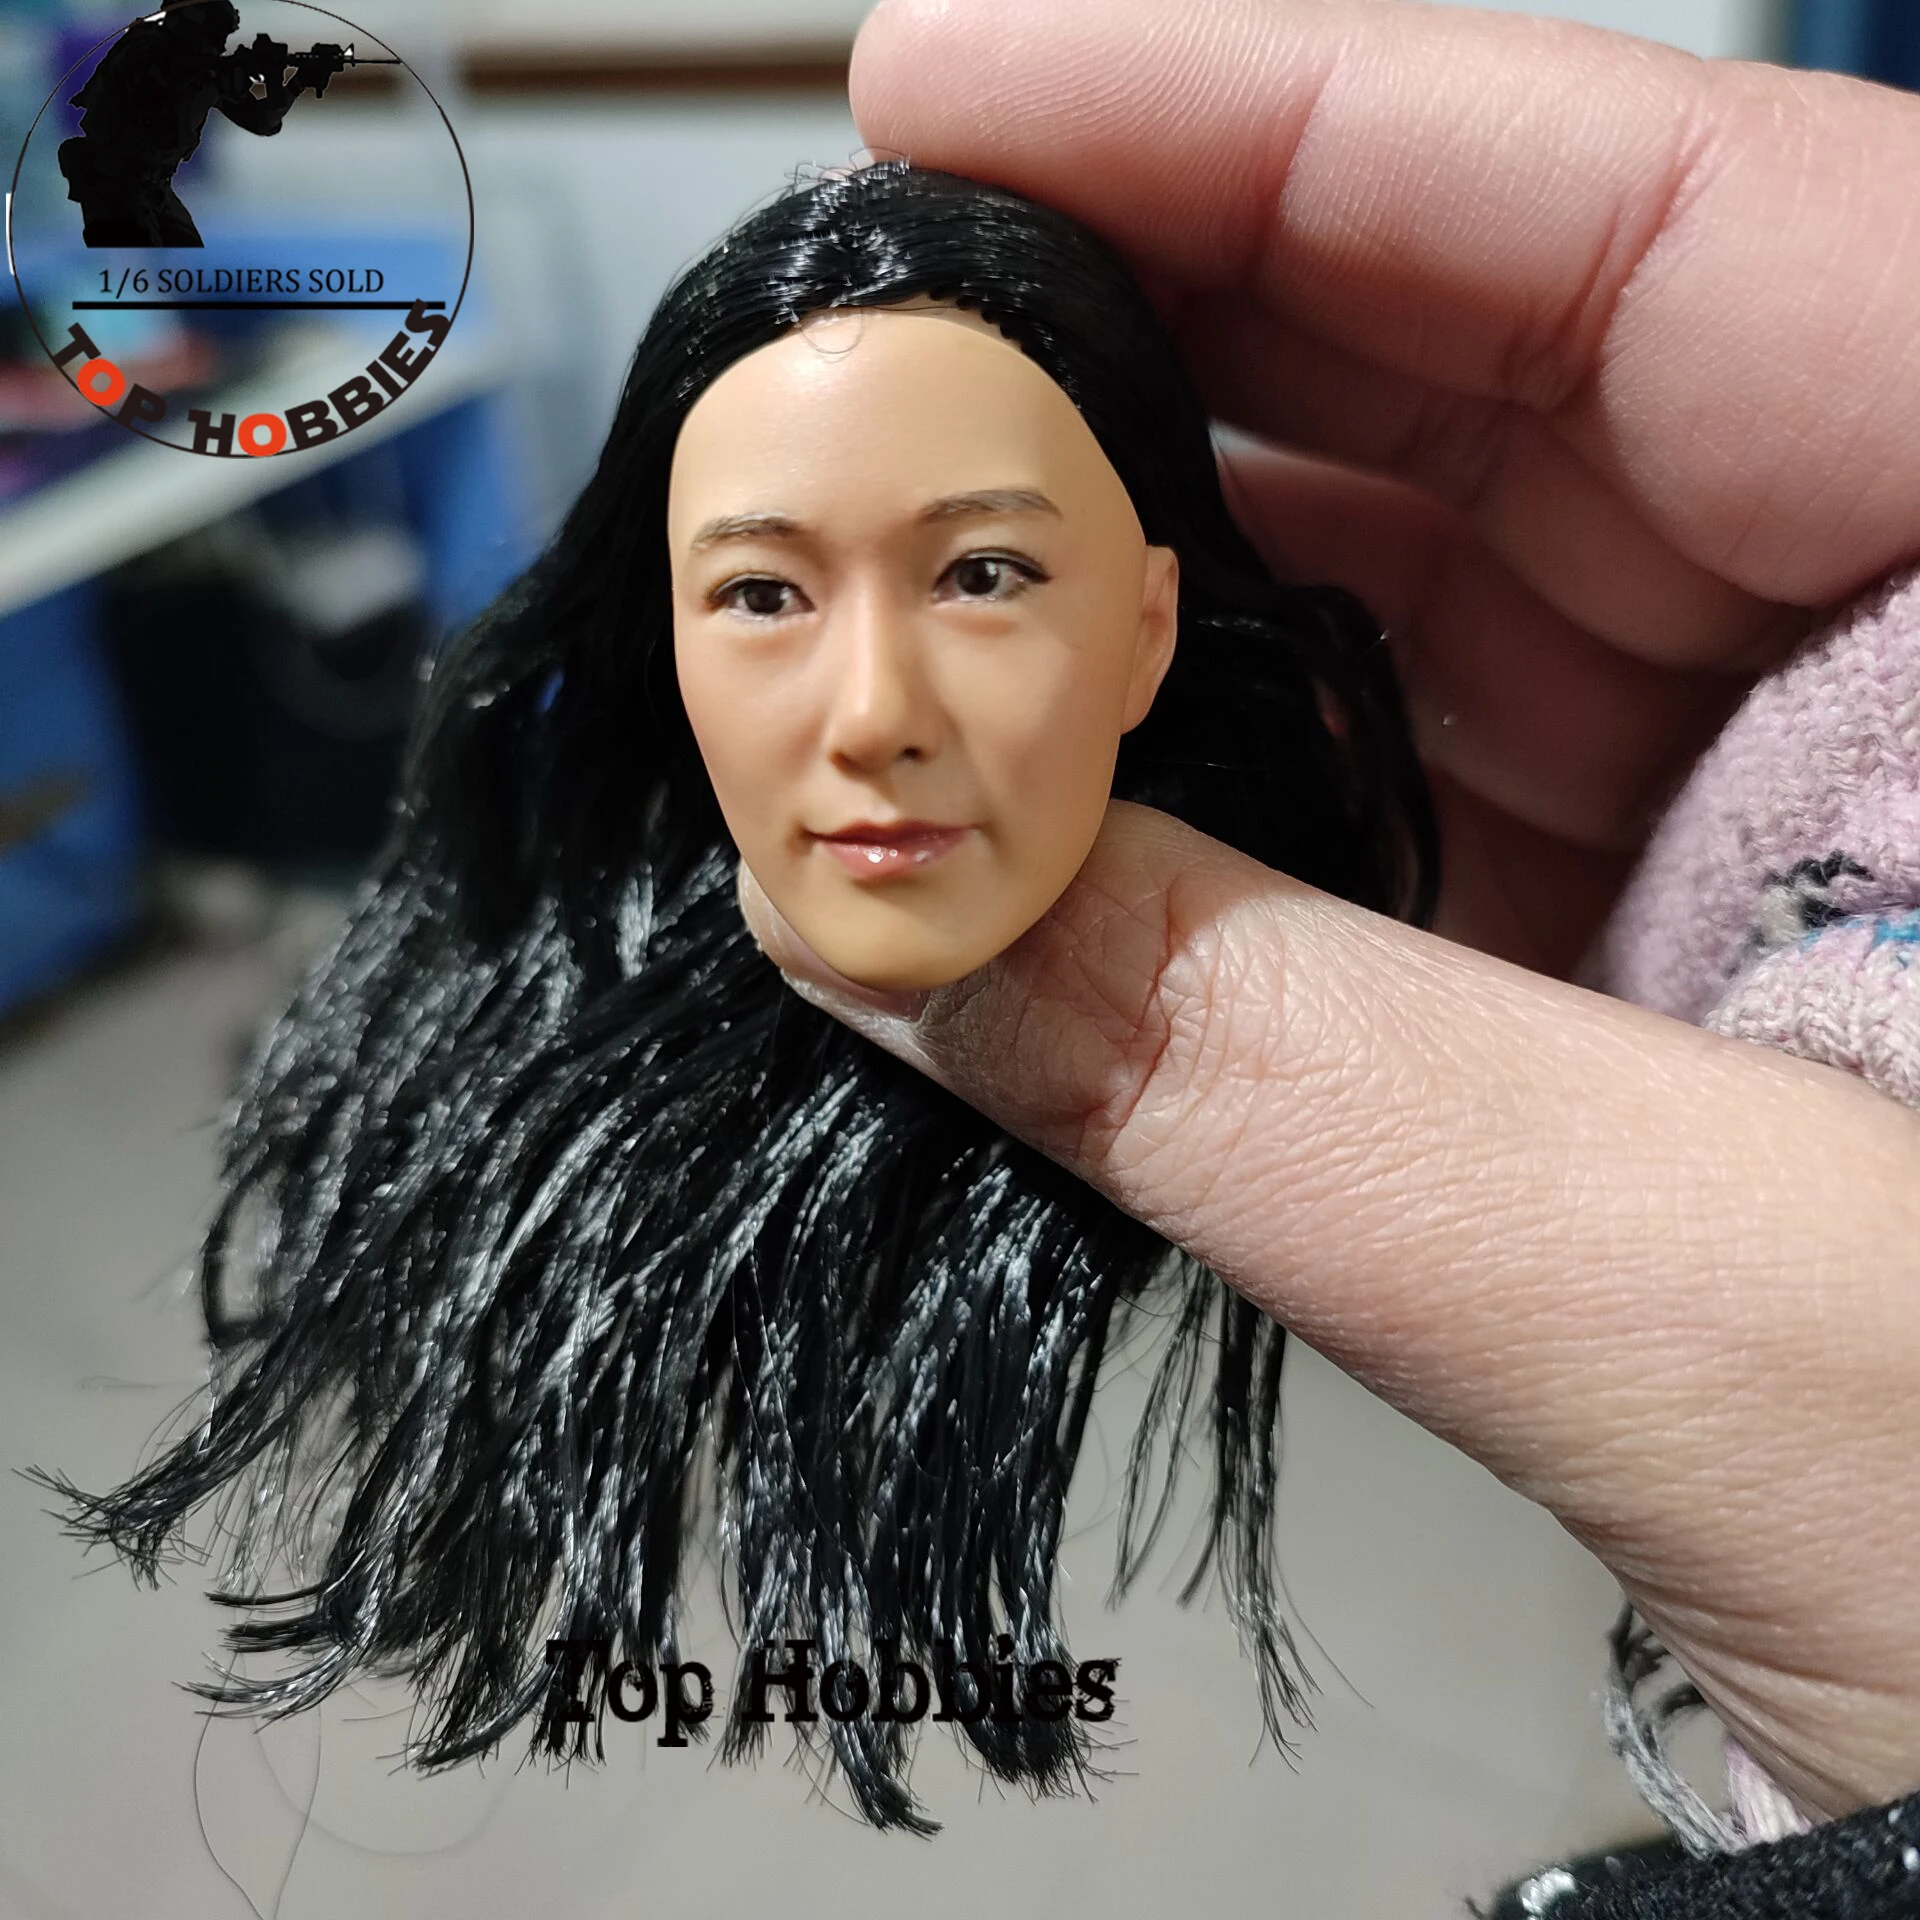 

KUMIK 1/6 Female Head Sculpt KM16-13 Black Straight Hair Fit 12" JIAOU DOLL Tbleague Action Figure Body Model In stock Toy Gift